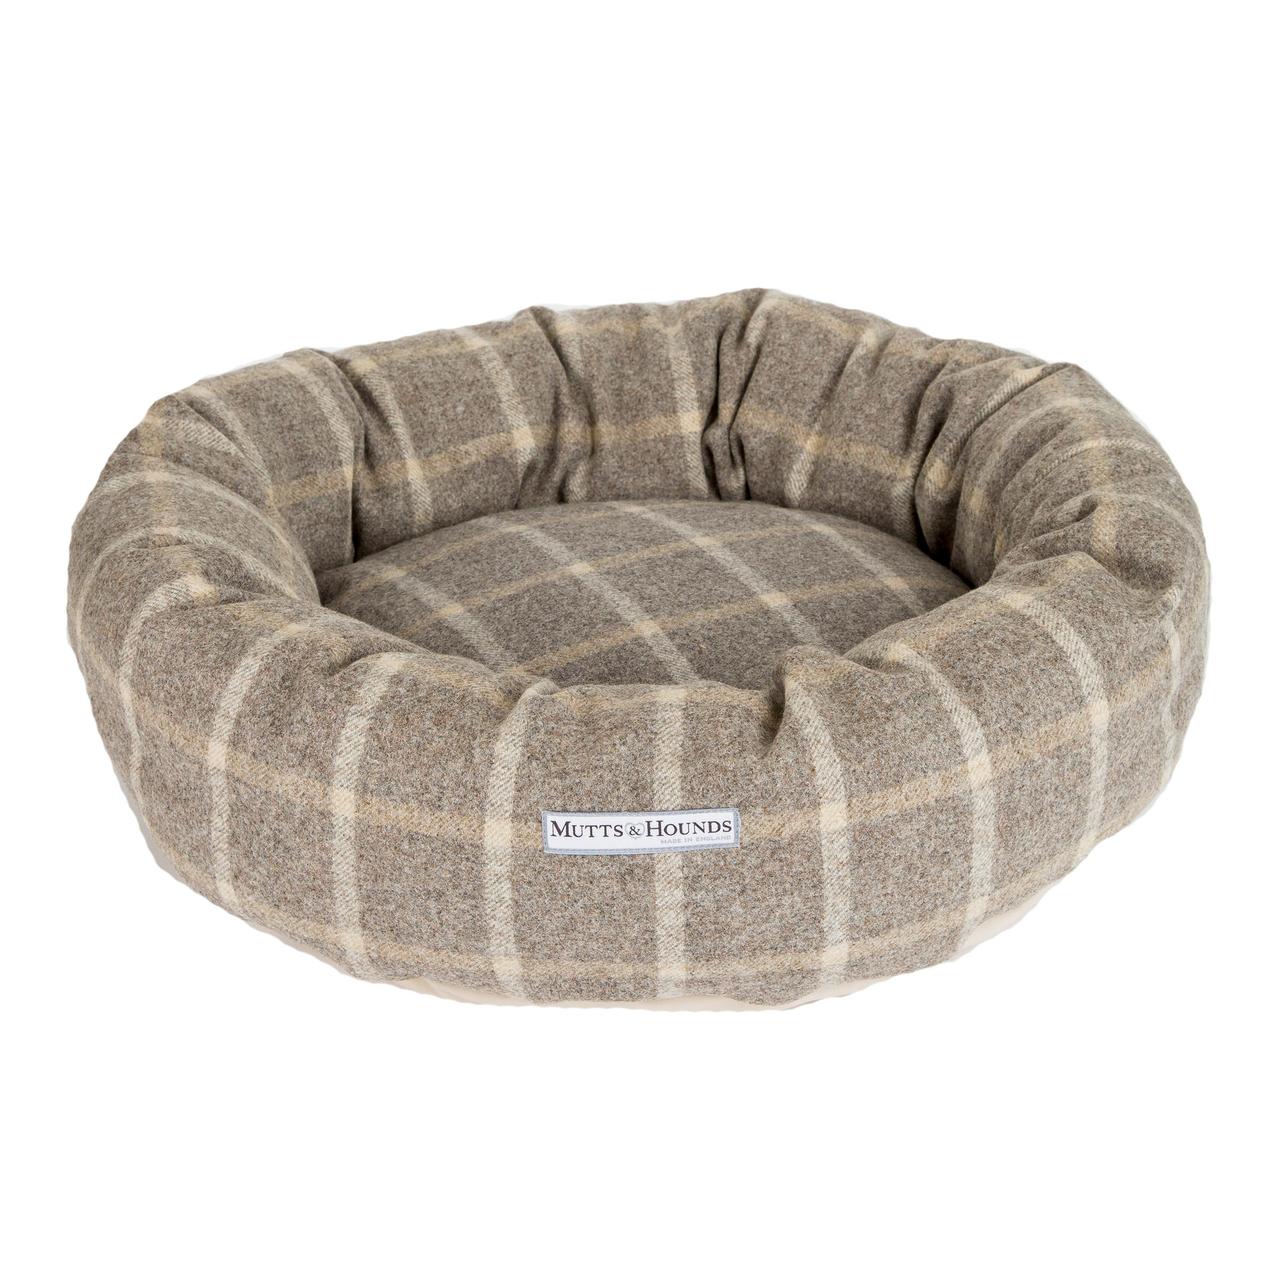 An image of Mutts & Hounds Slate Tweed Donut Bed Large